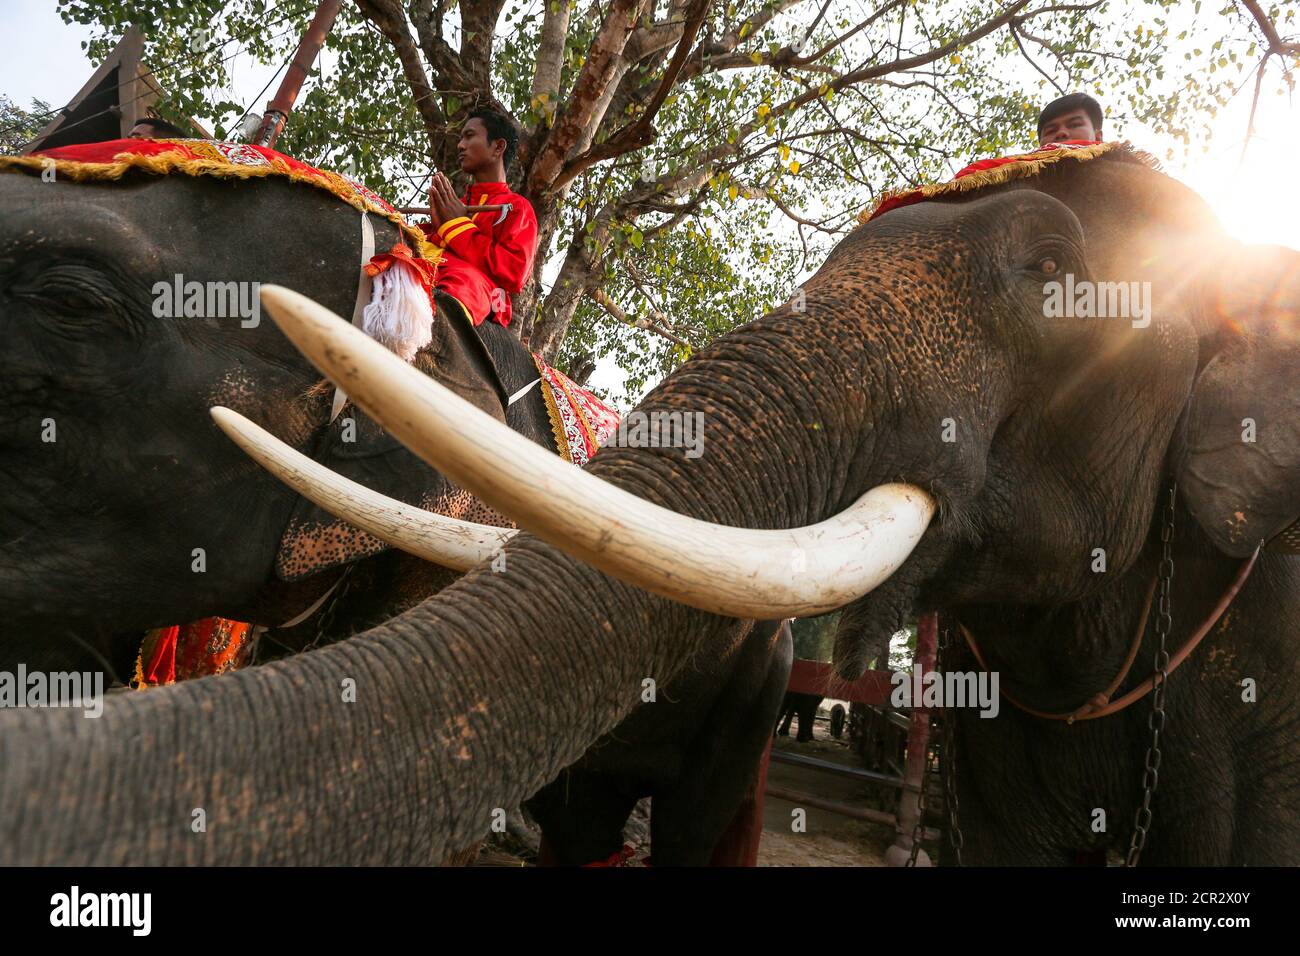 Mahouts pray while sitting on top of elephants during Thailand's national  elephant day celebration in the ancient city of Ayutthaya, Thailand, March  13, 2018. REUTERS/Athit Perawongmetha Stock Photo - Alamy